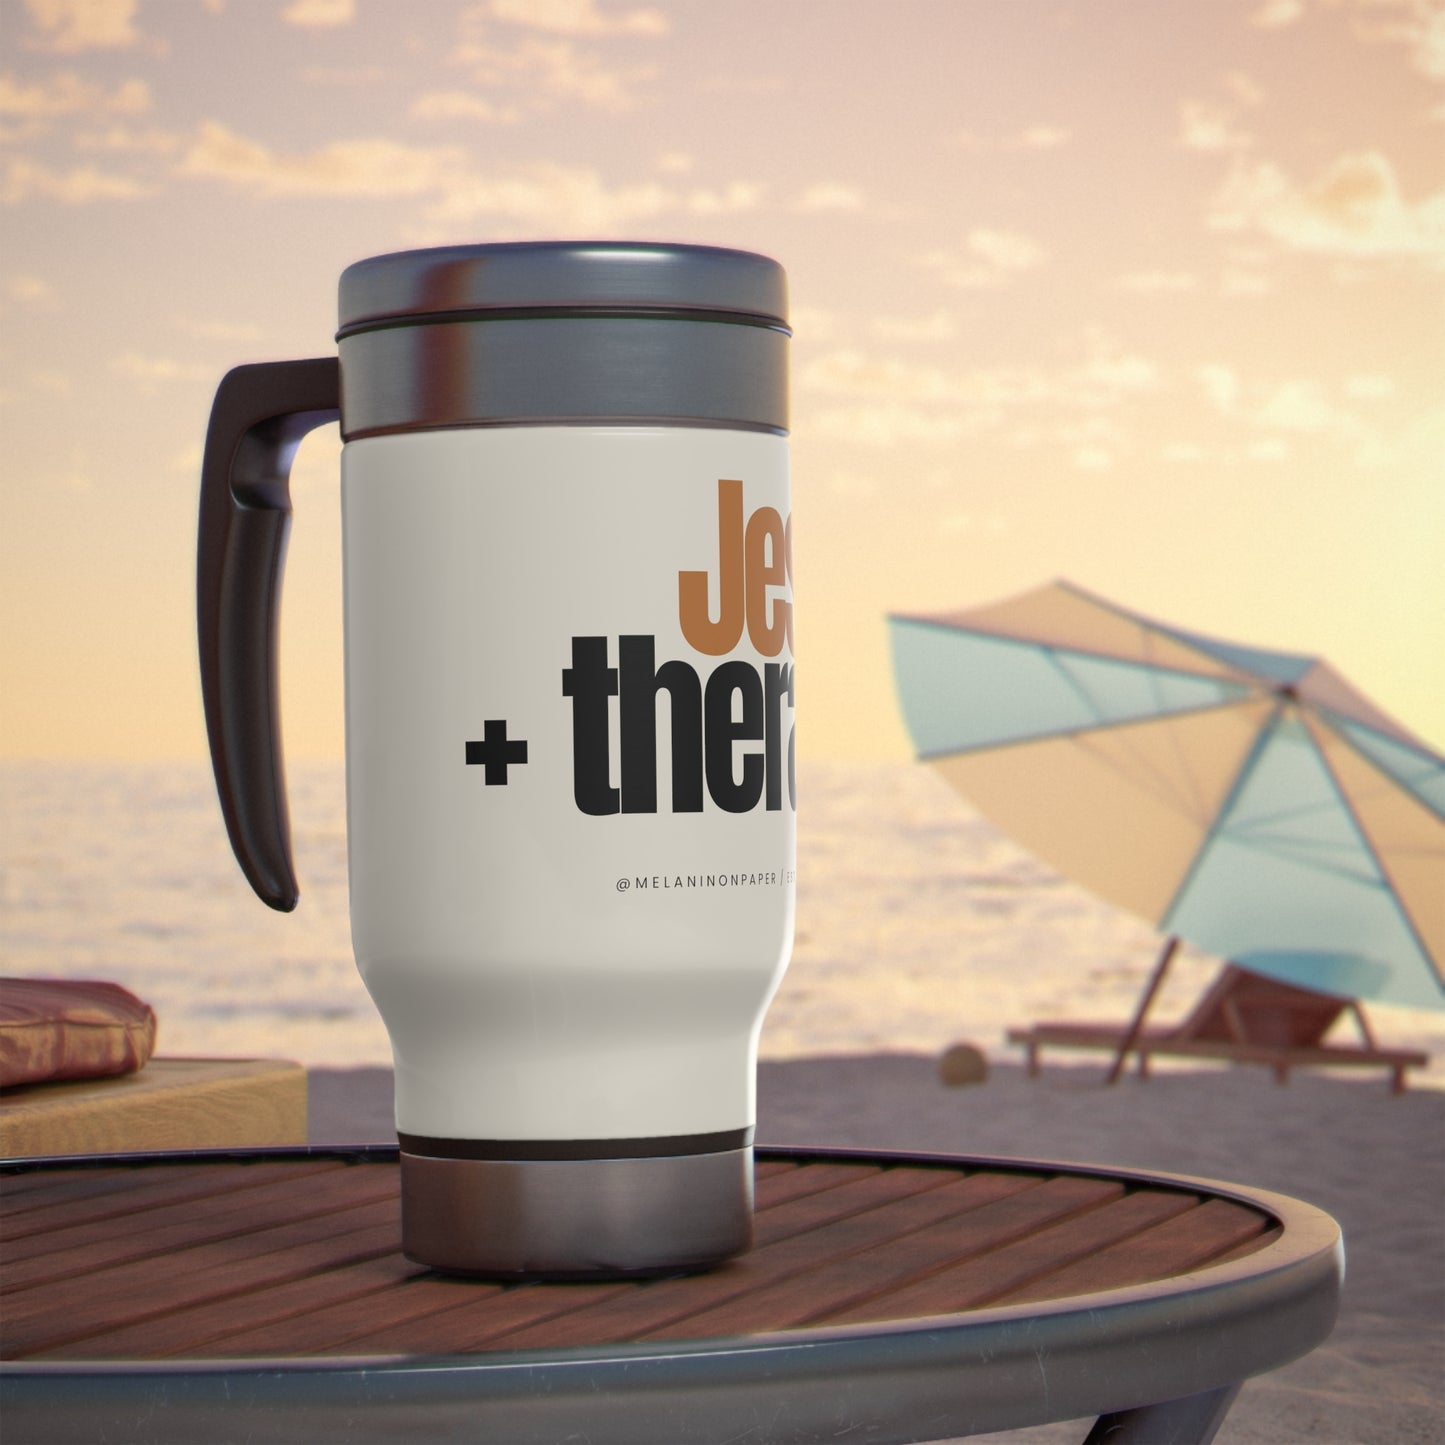 "Jesus + therapy" Stainless Steel Travel Mug with Handle, 14oz